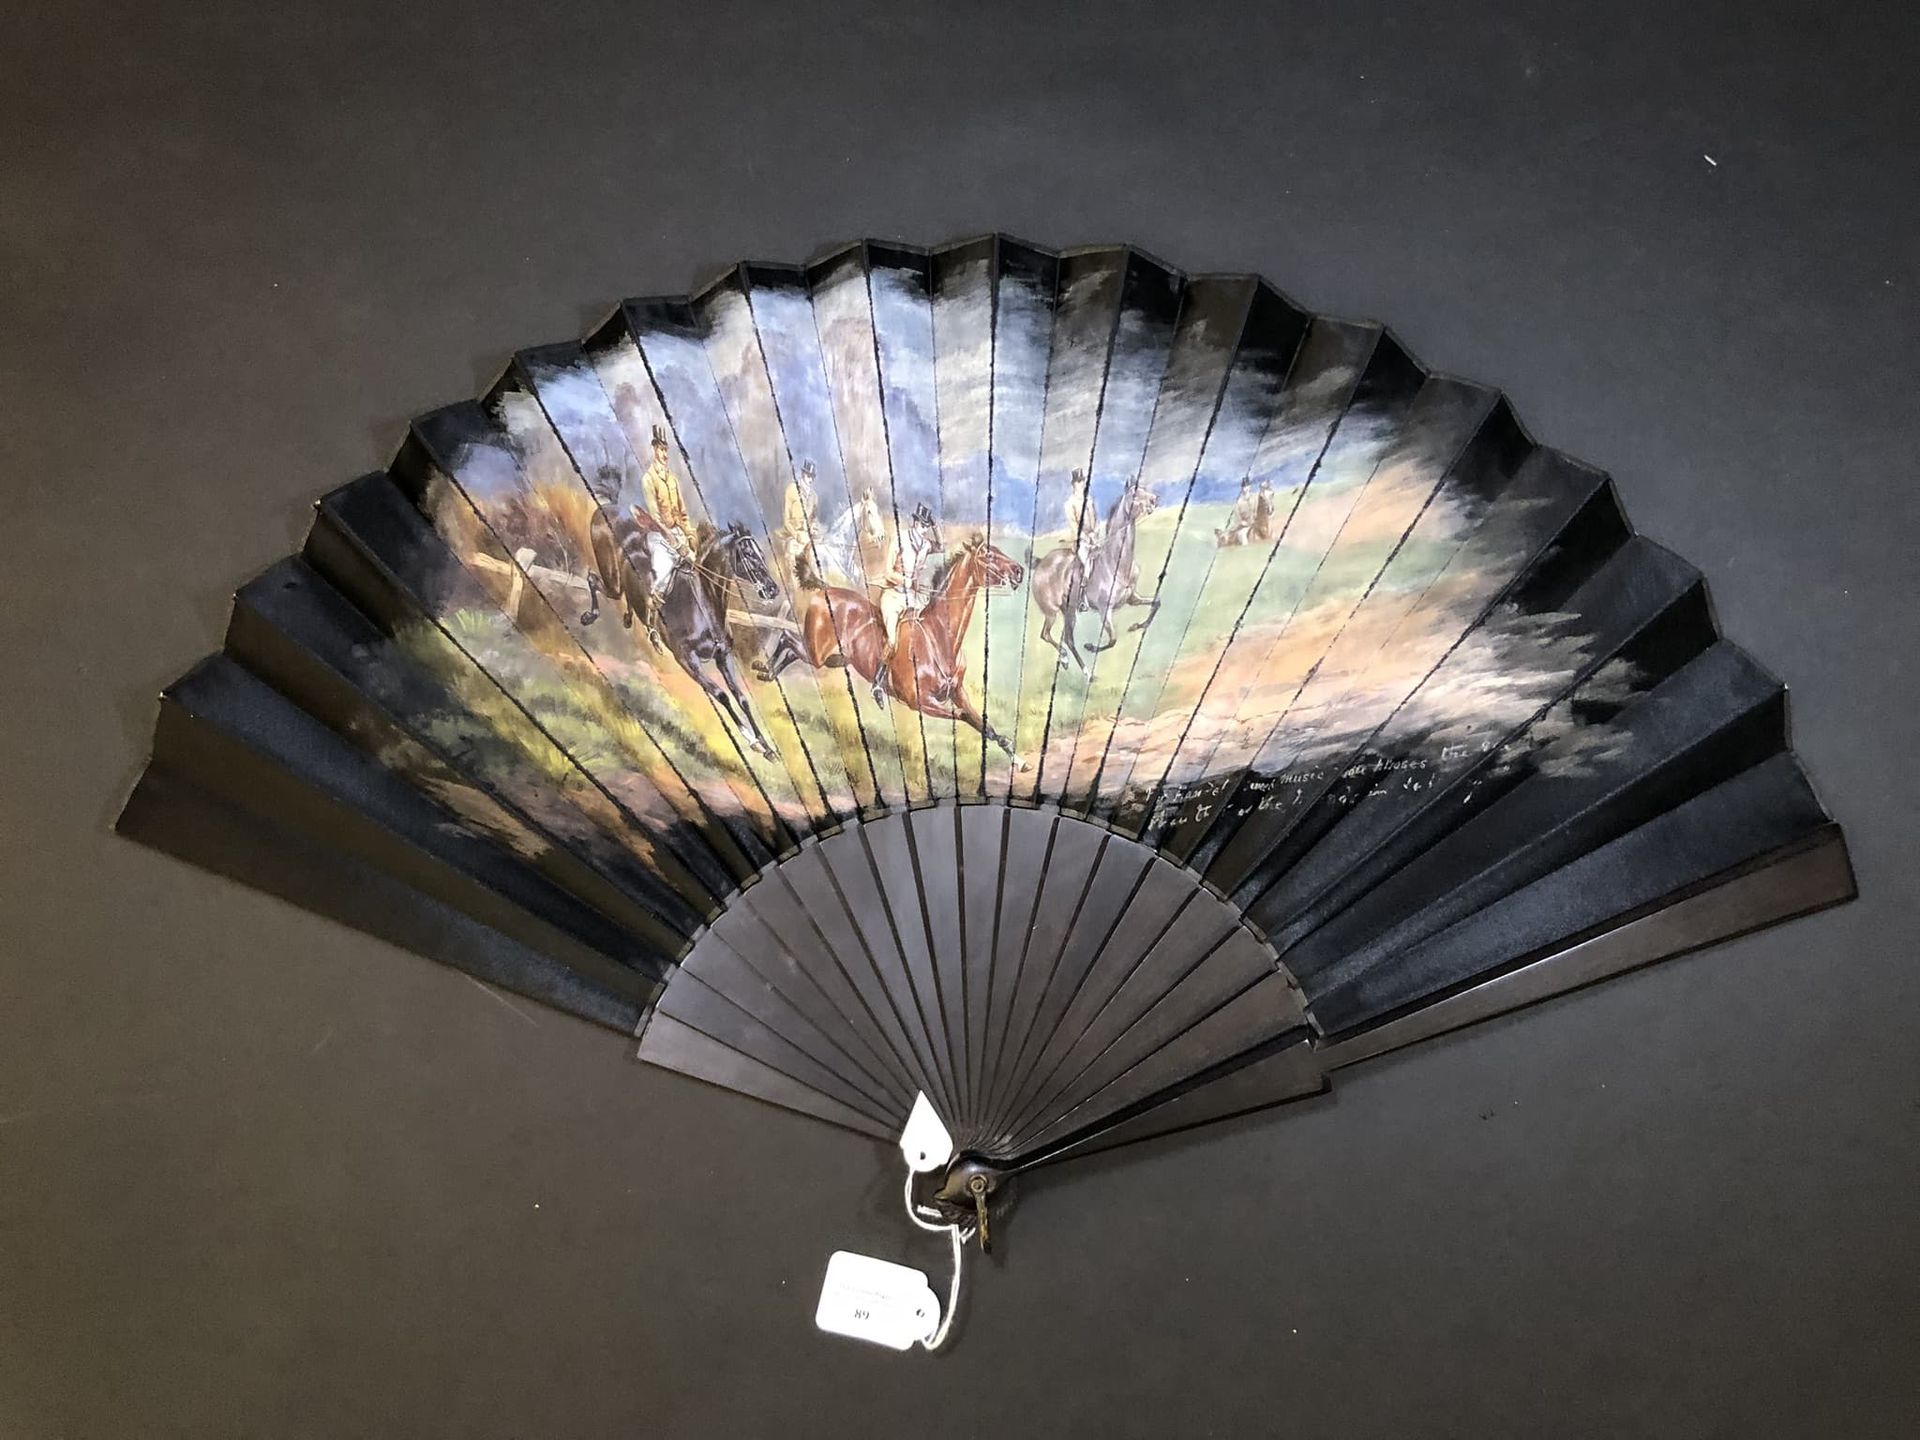 Null Show jumping, Europe, ca. 1890
Folded fan, the black satin sheet painted wi&hellip;